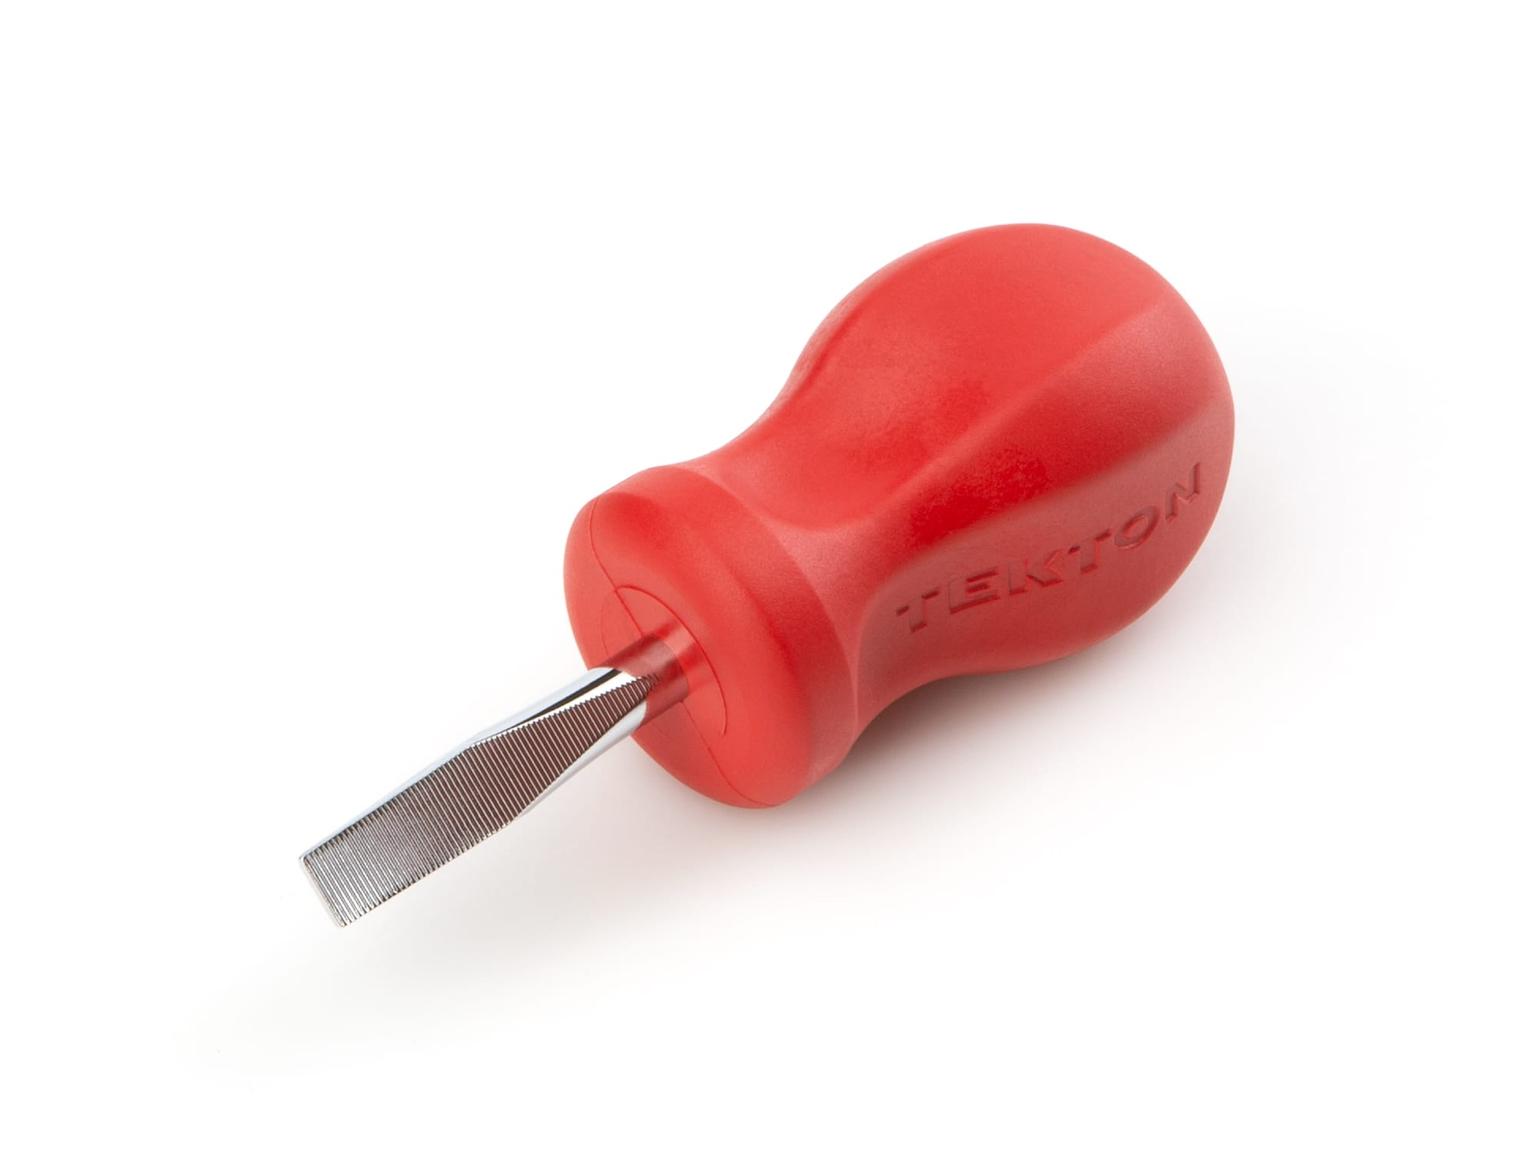 TEKTON DSS30250-T Stubby 1/4 Inch Slotted Hard Handle Screwdriver